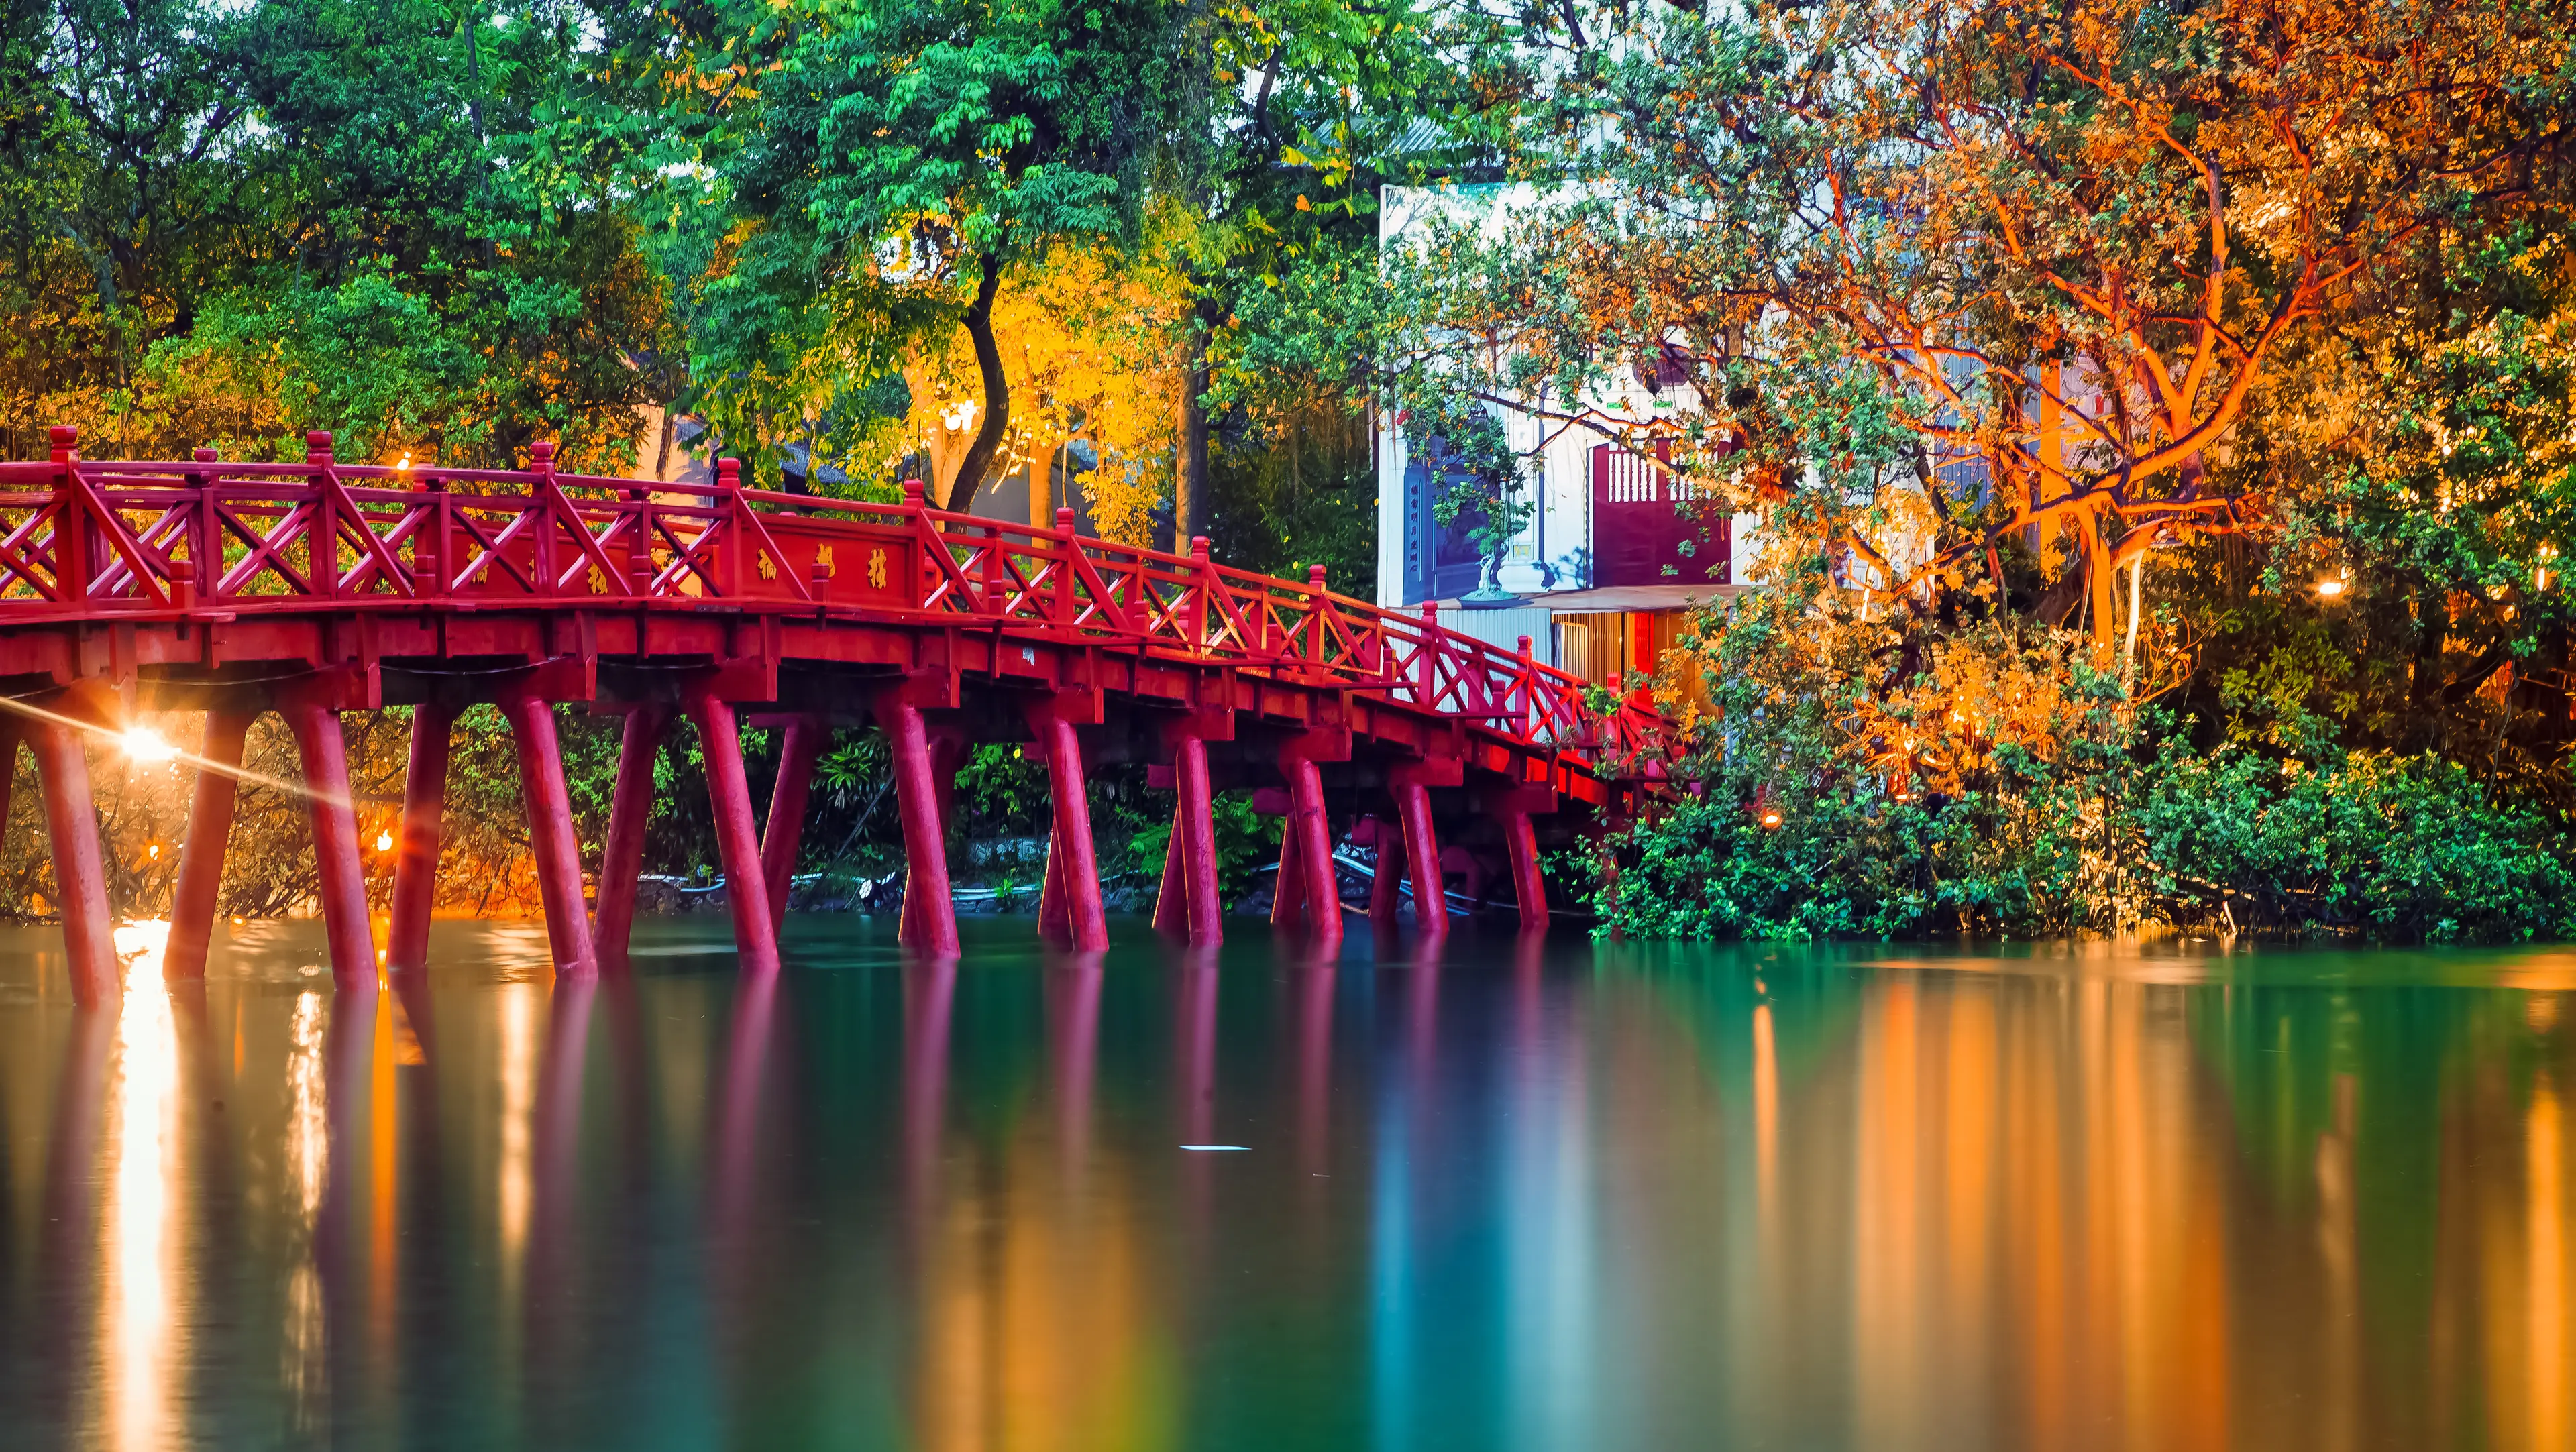 2-Day Hanoi Adventure: Nightlife and Sightseeing with Friends